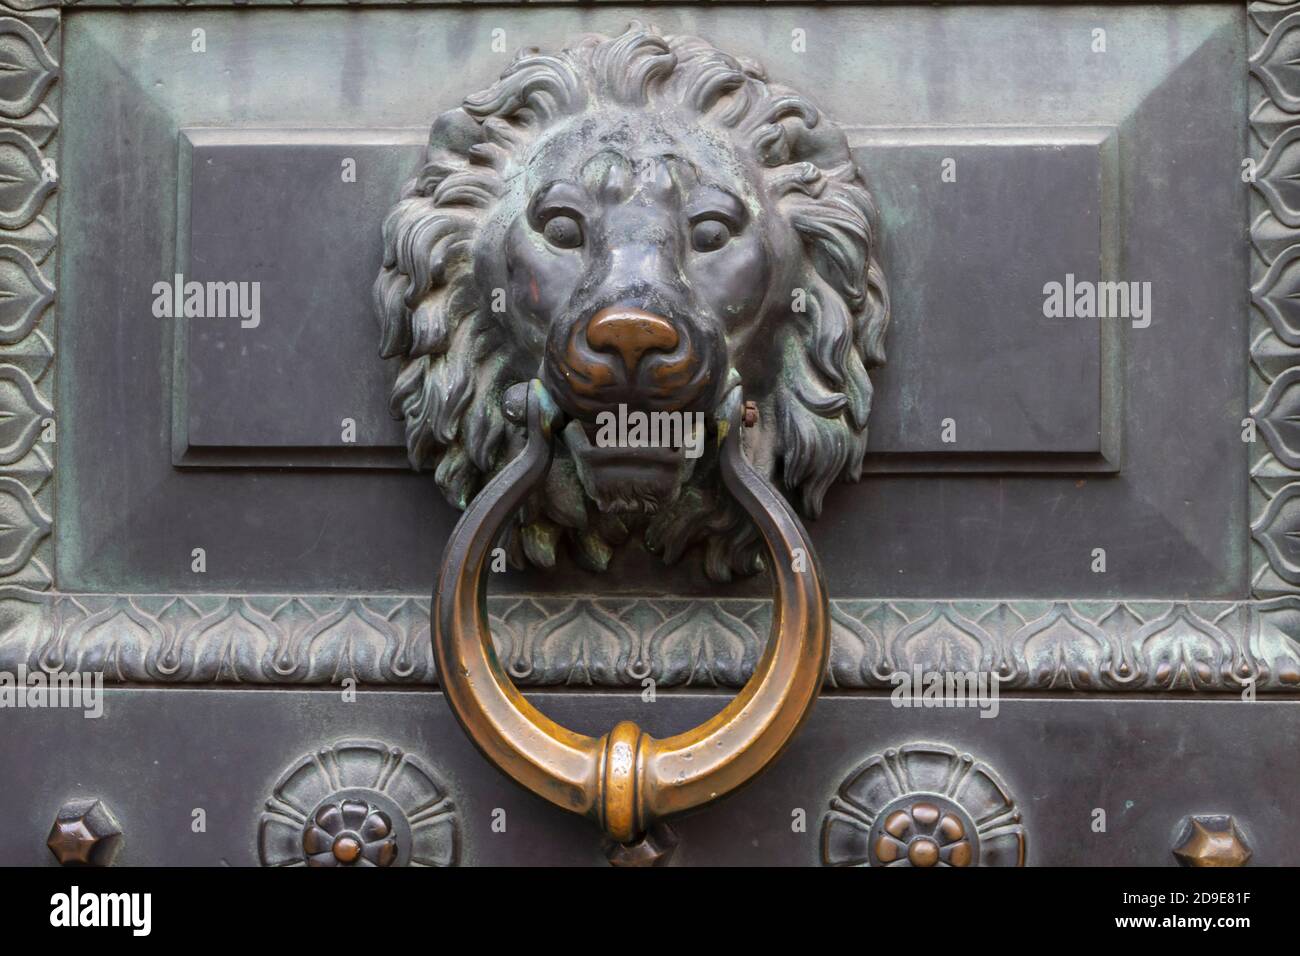 Antique bronze door knocking knob ring in the form of a lion's face on an old door. Stock Photo